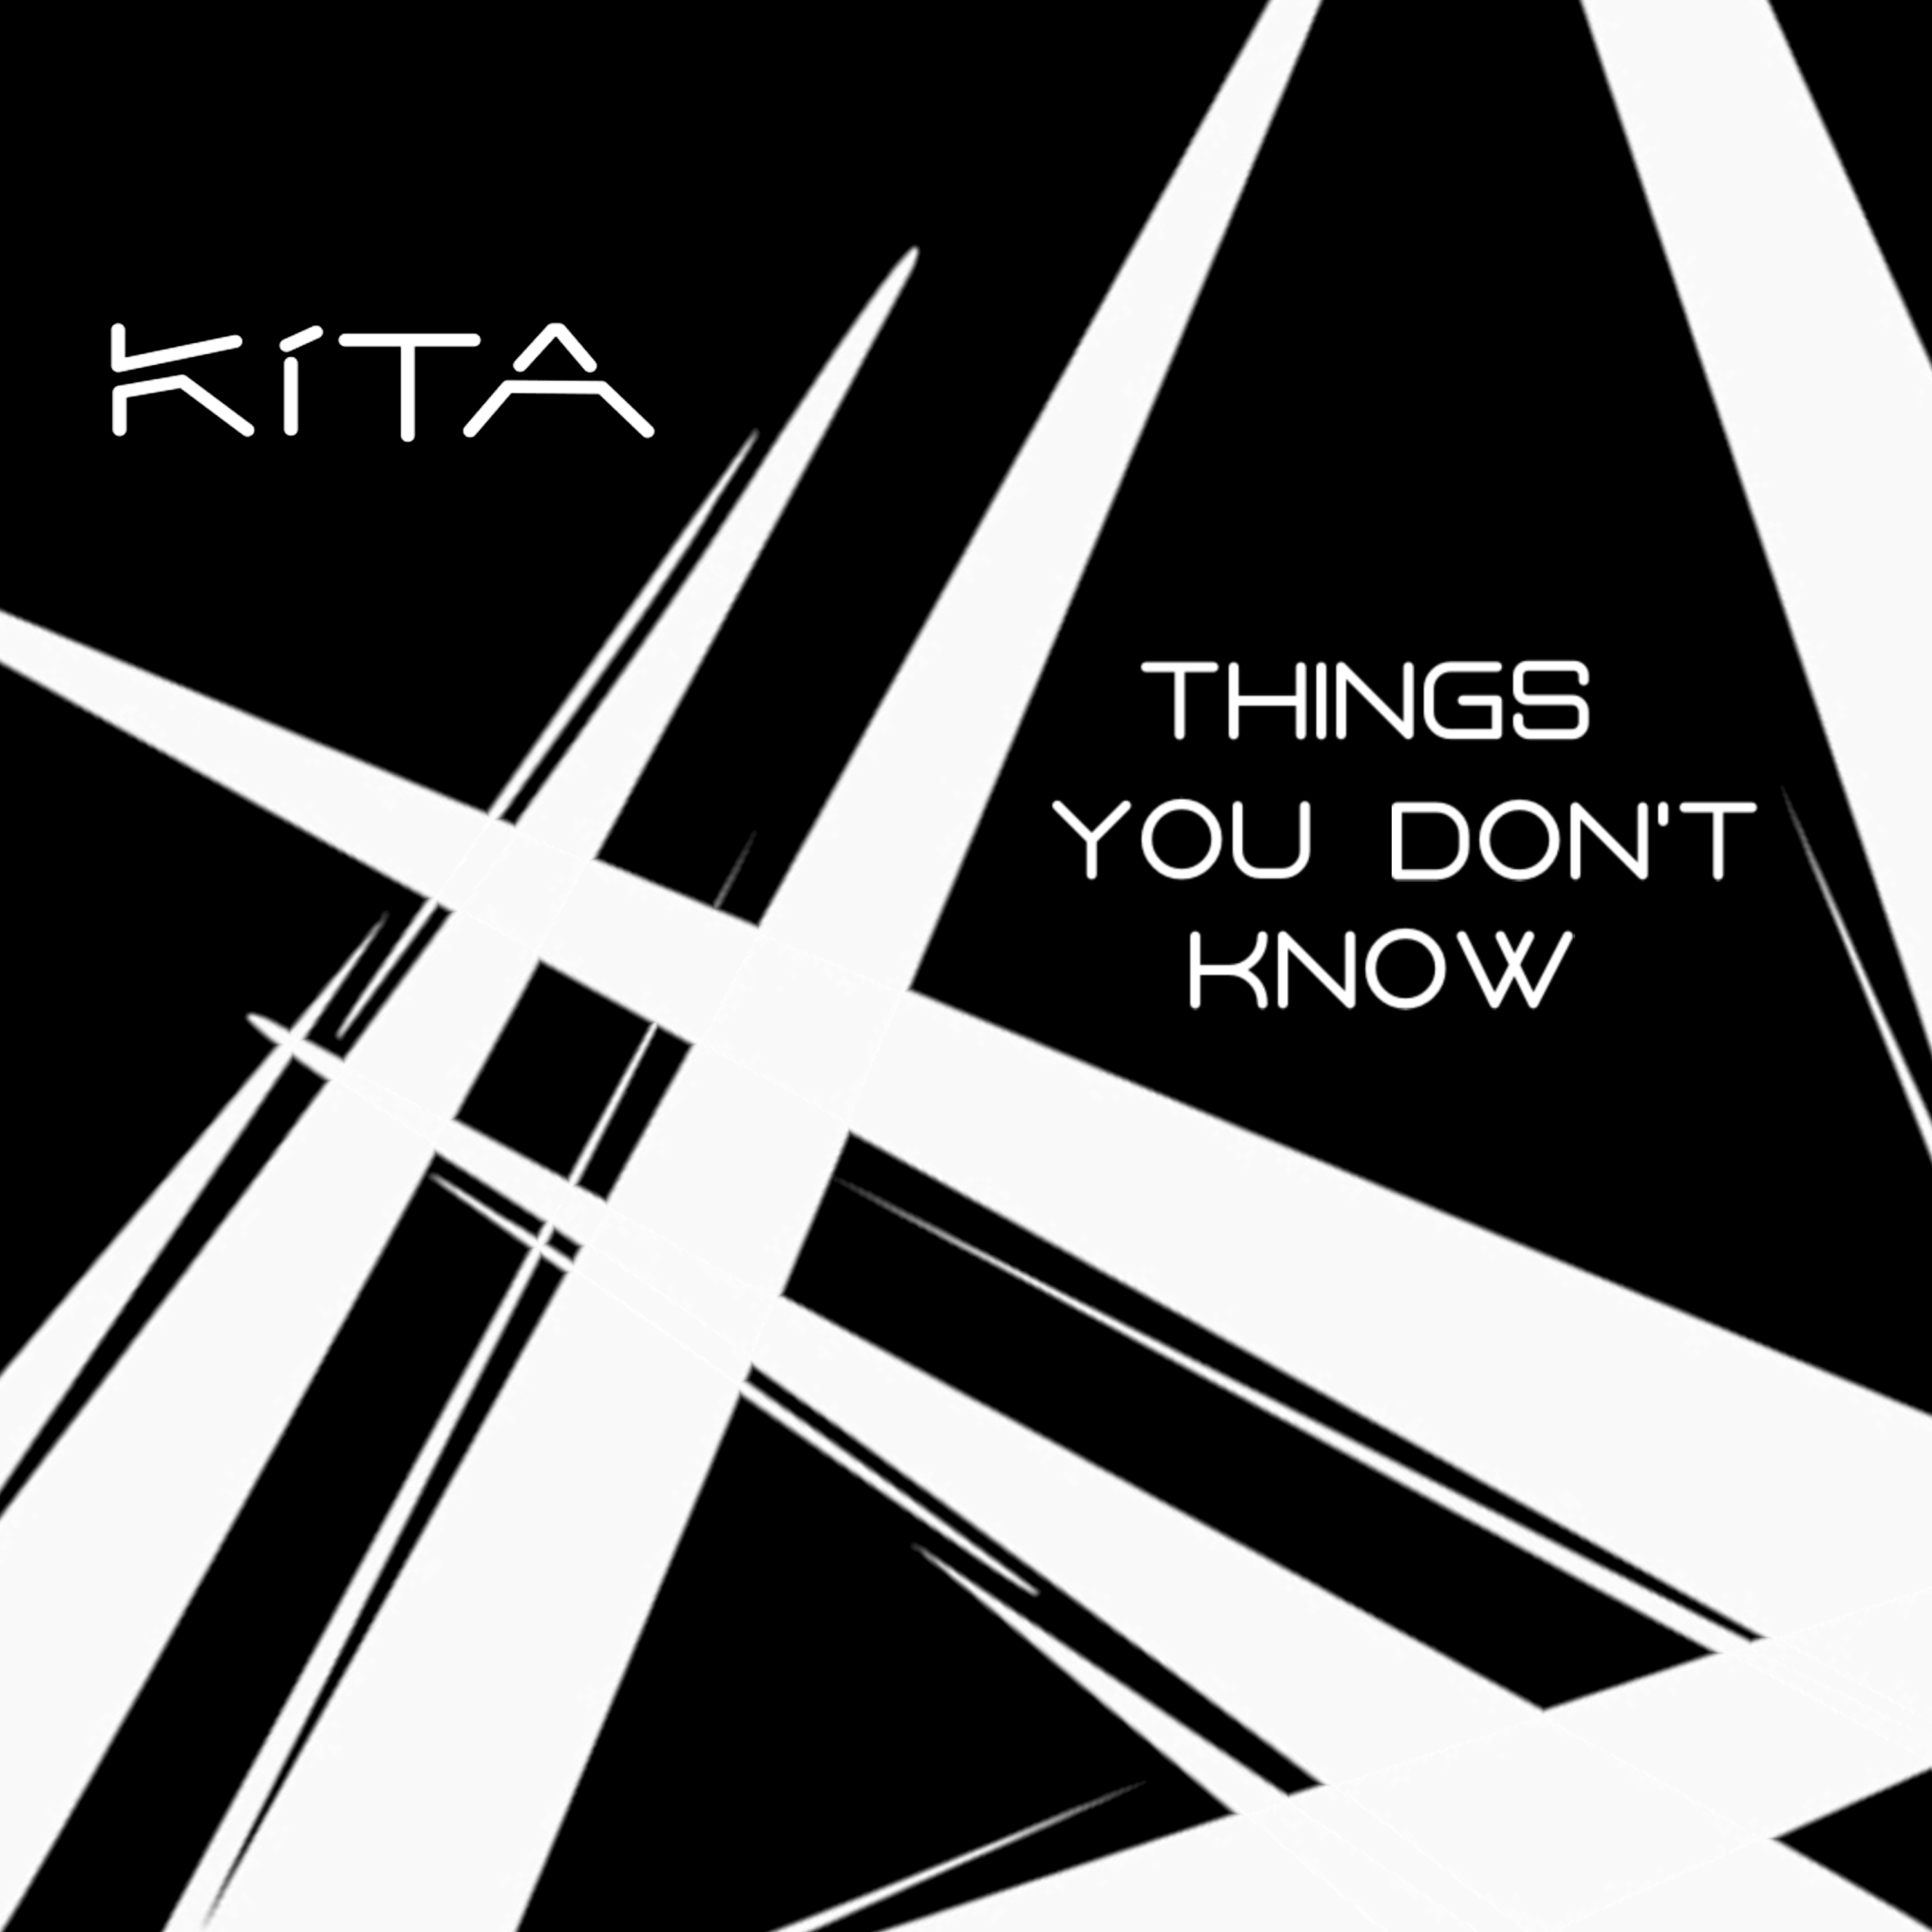 KÍTA Stresses Self-Confidence In “Things You Don’t Know.”